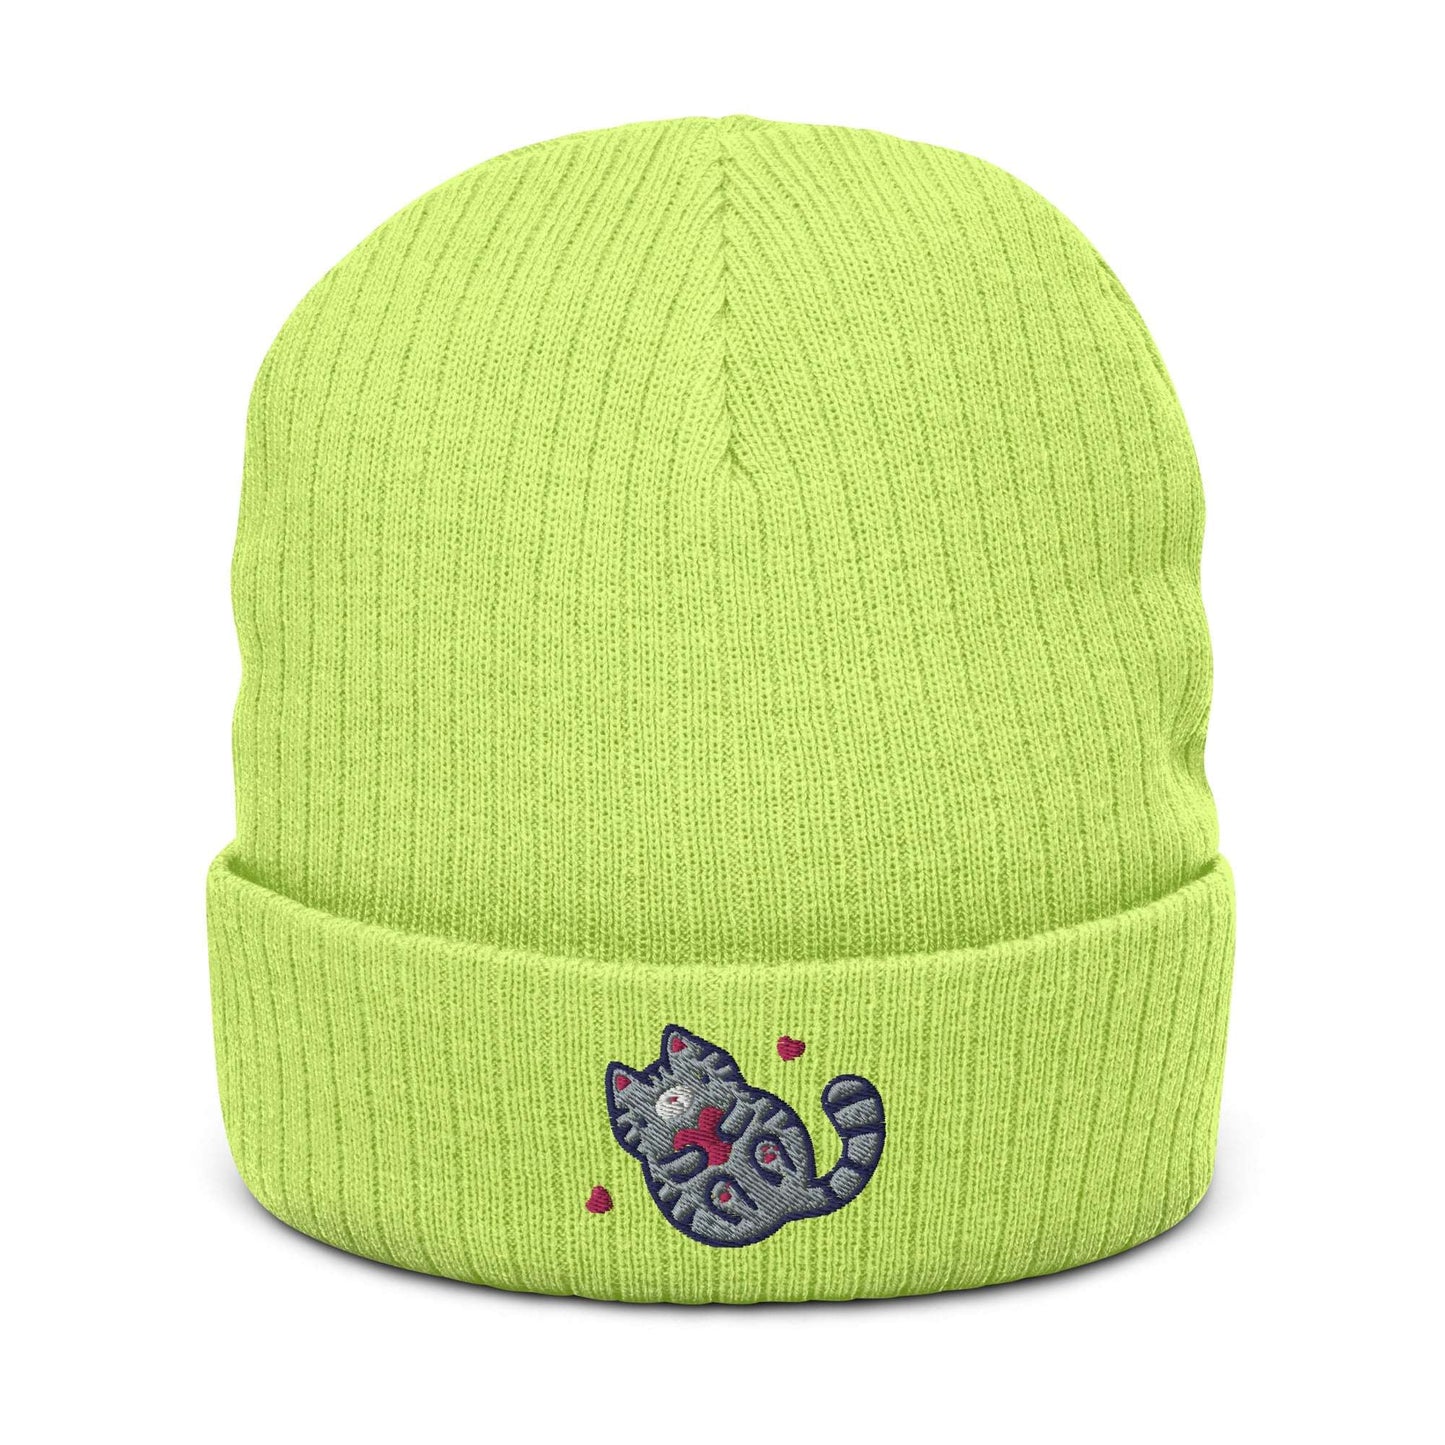 Ribbed Beanie with Embroidered Grey Tabby Cat. Unisex Toque: Acid Green